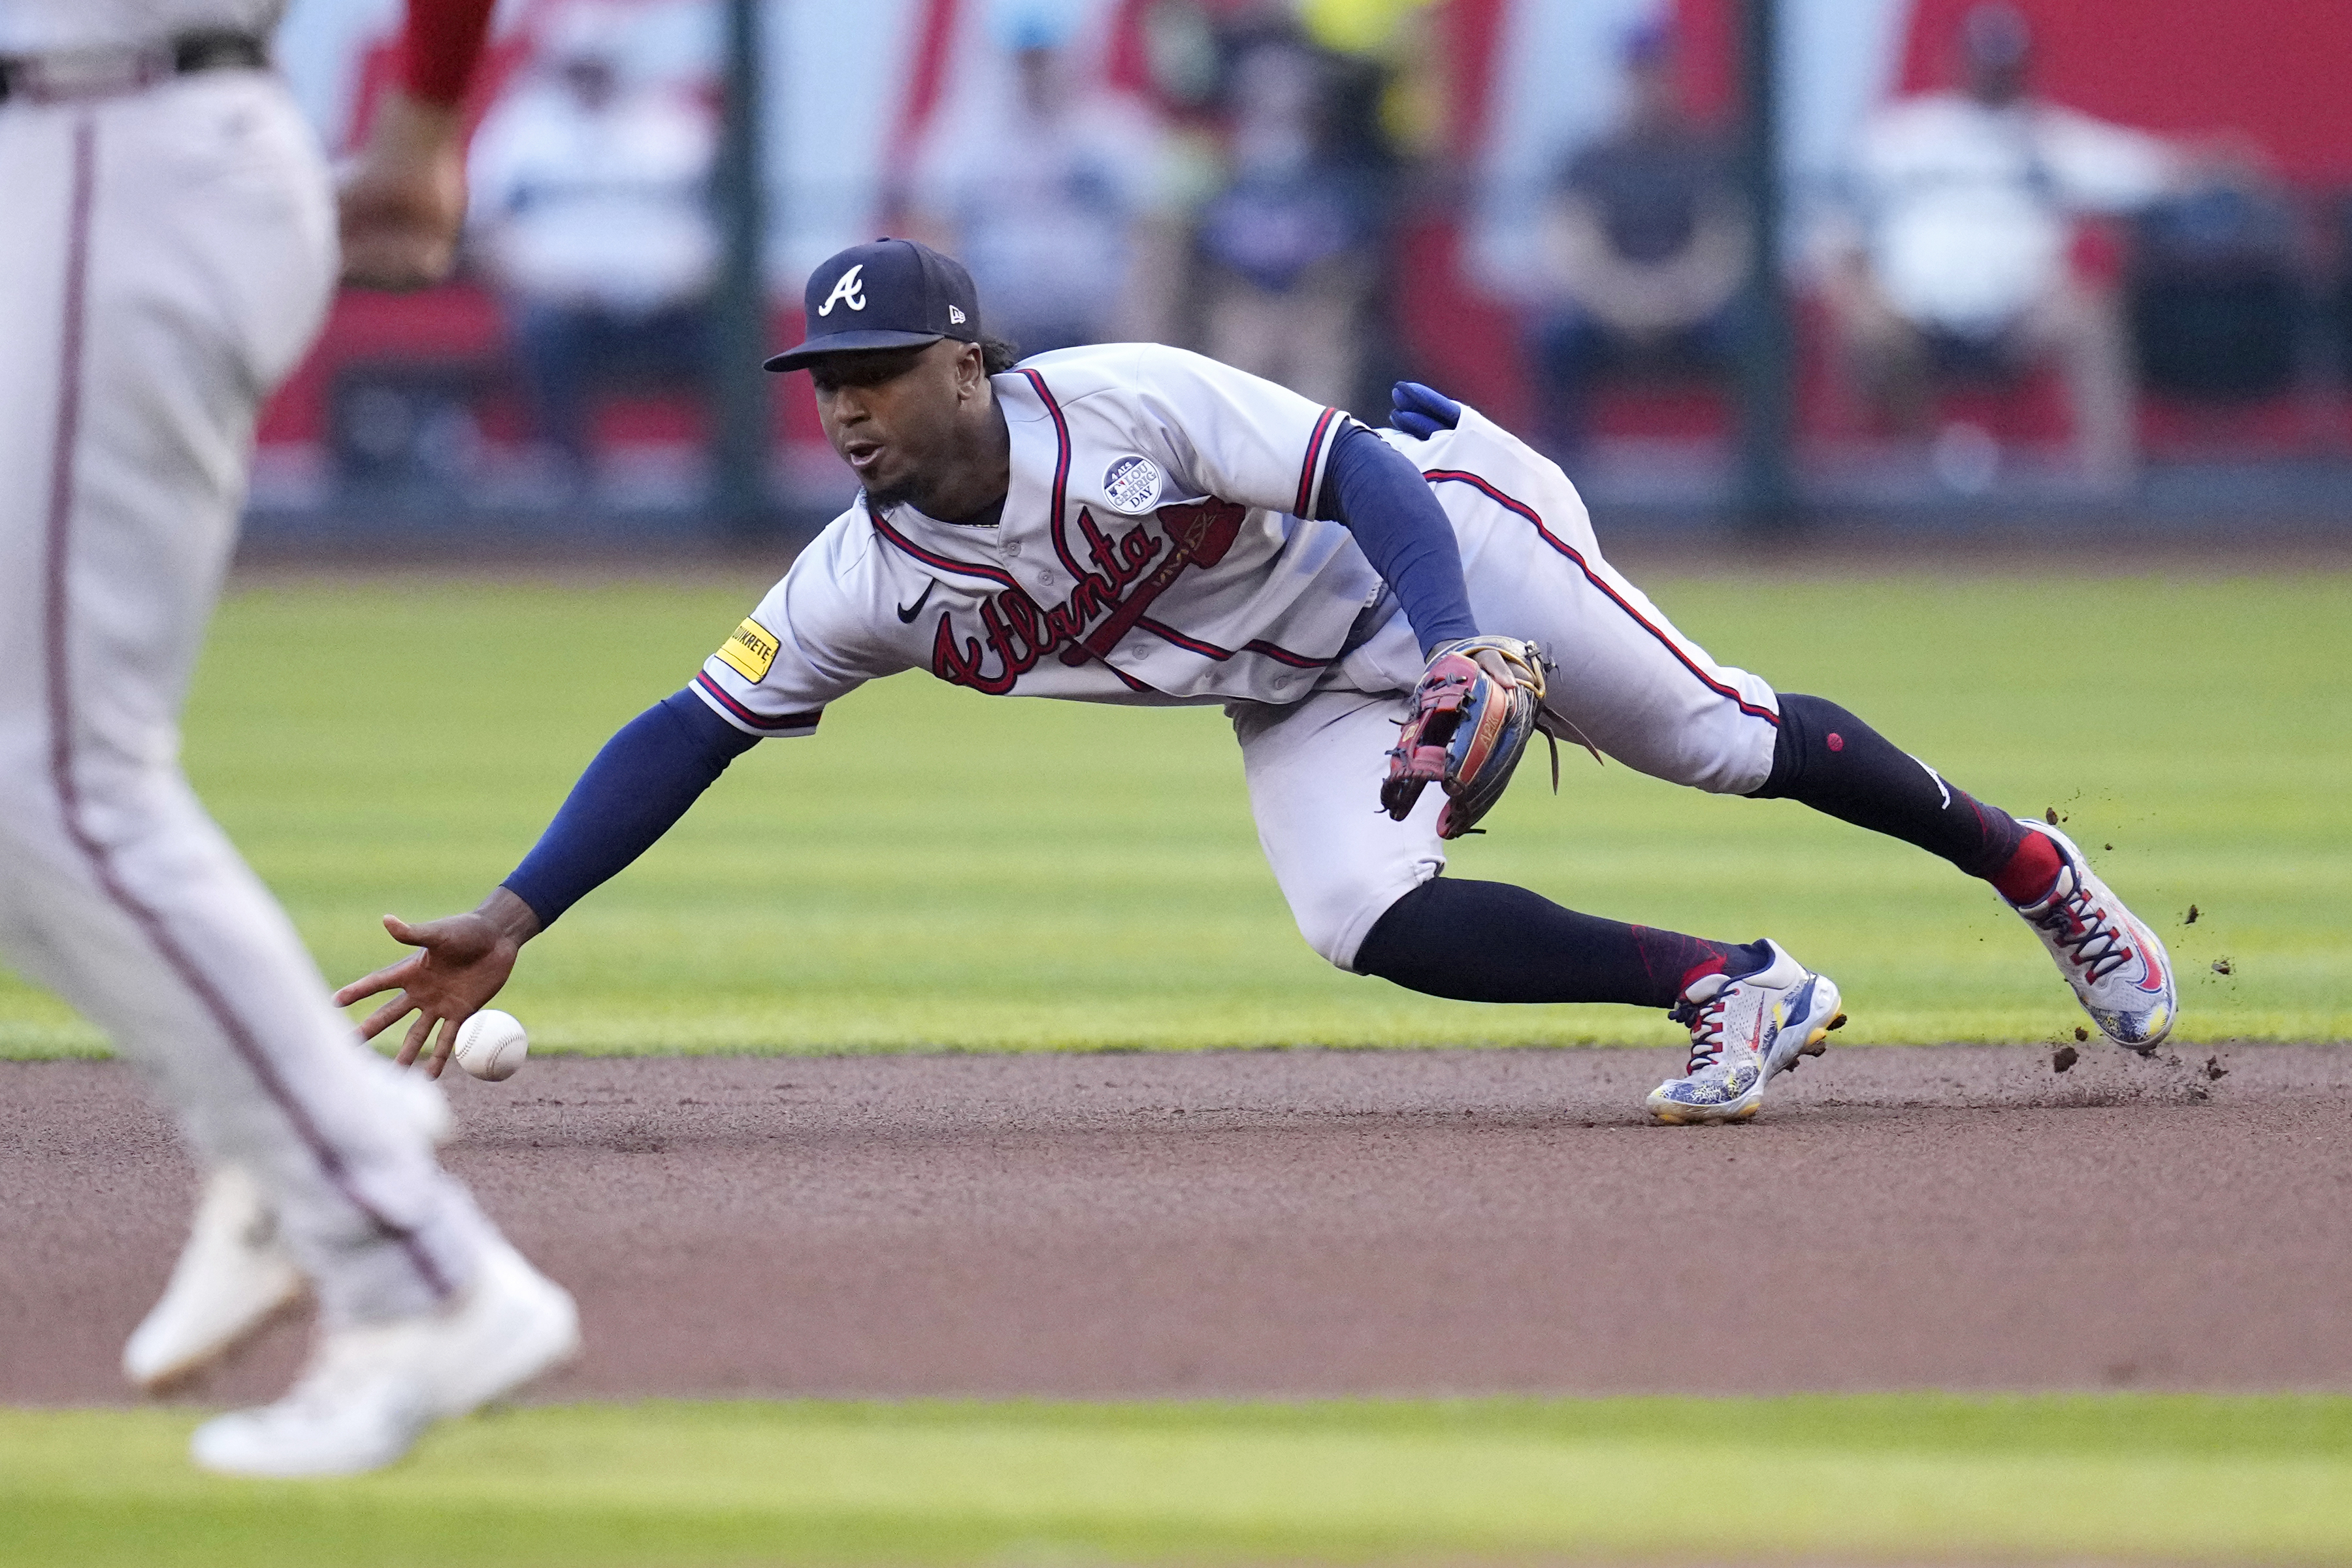 Size matters: Ozzie Albies wins height contest with Ronald